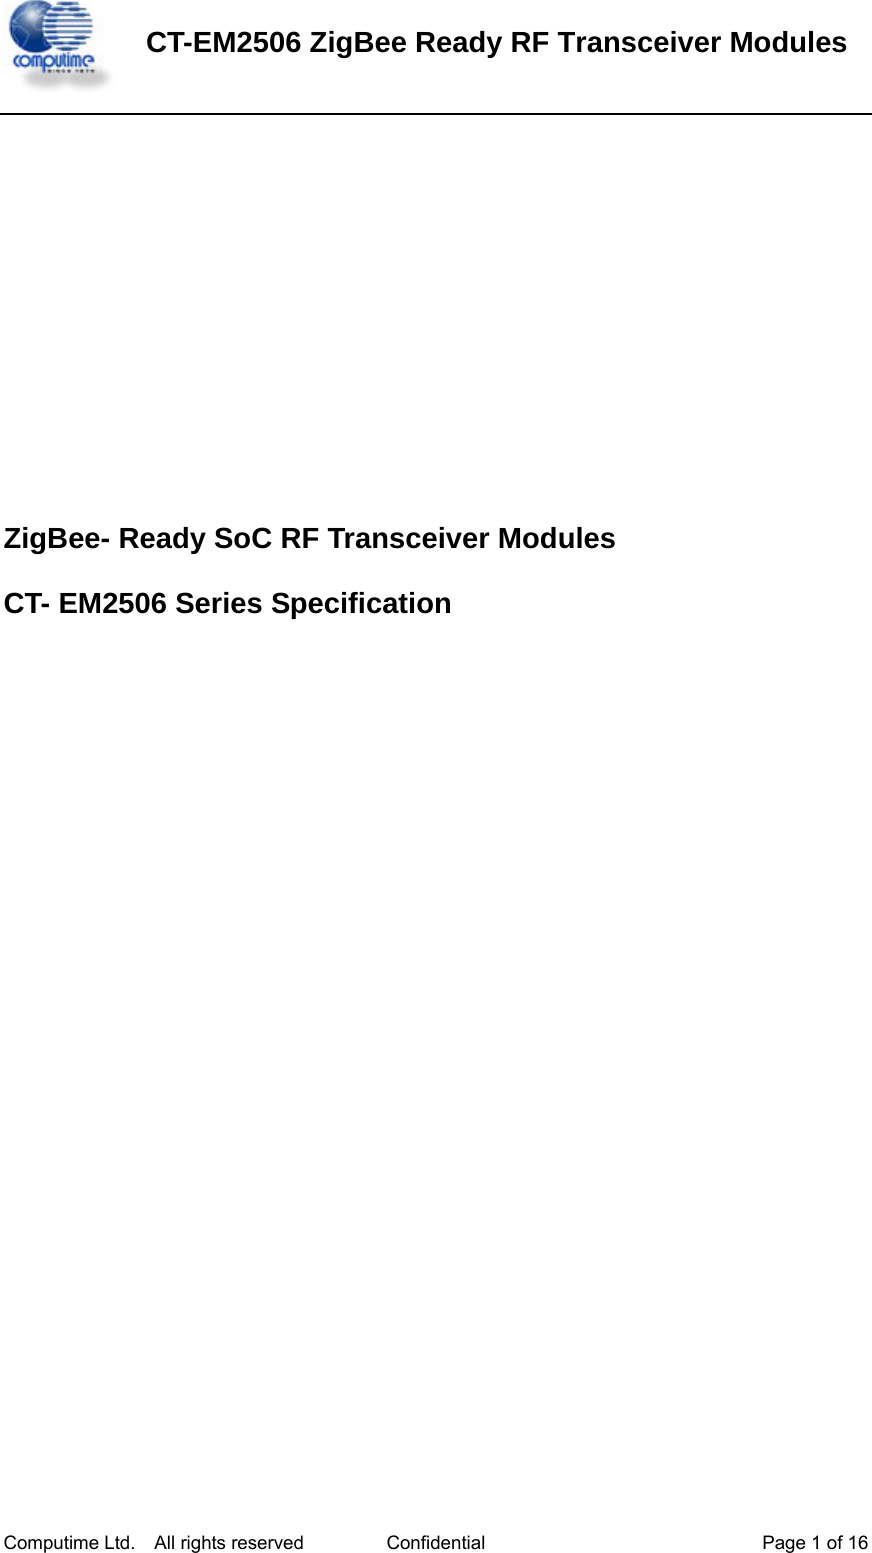  CT-EM2506 ZigBee Ready RF Transceiver Modules Computime Ltd.    All rights reserved  Confidential  Page 1 of 16        ZigBee- Ready SoC RF Transceiver Modules CT- EM2506 Series Specification